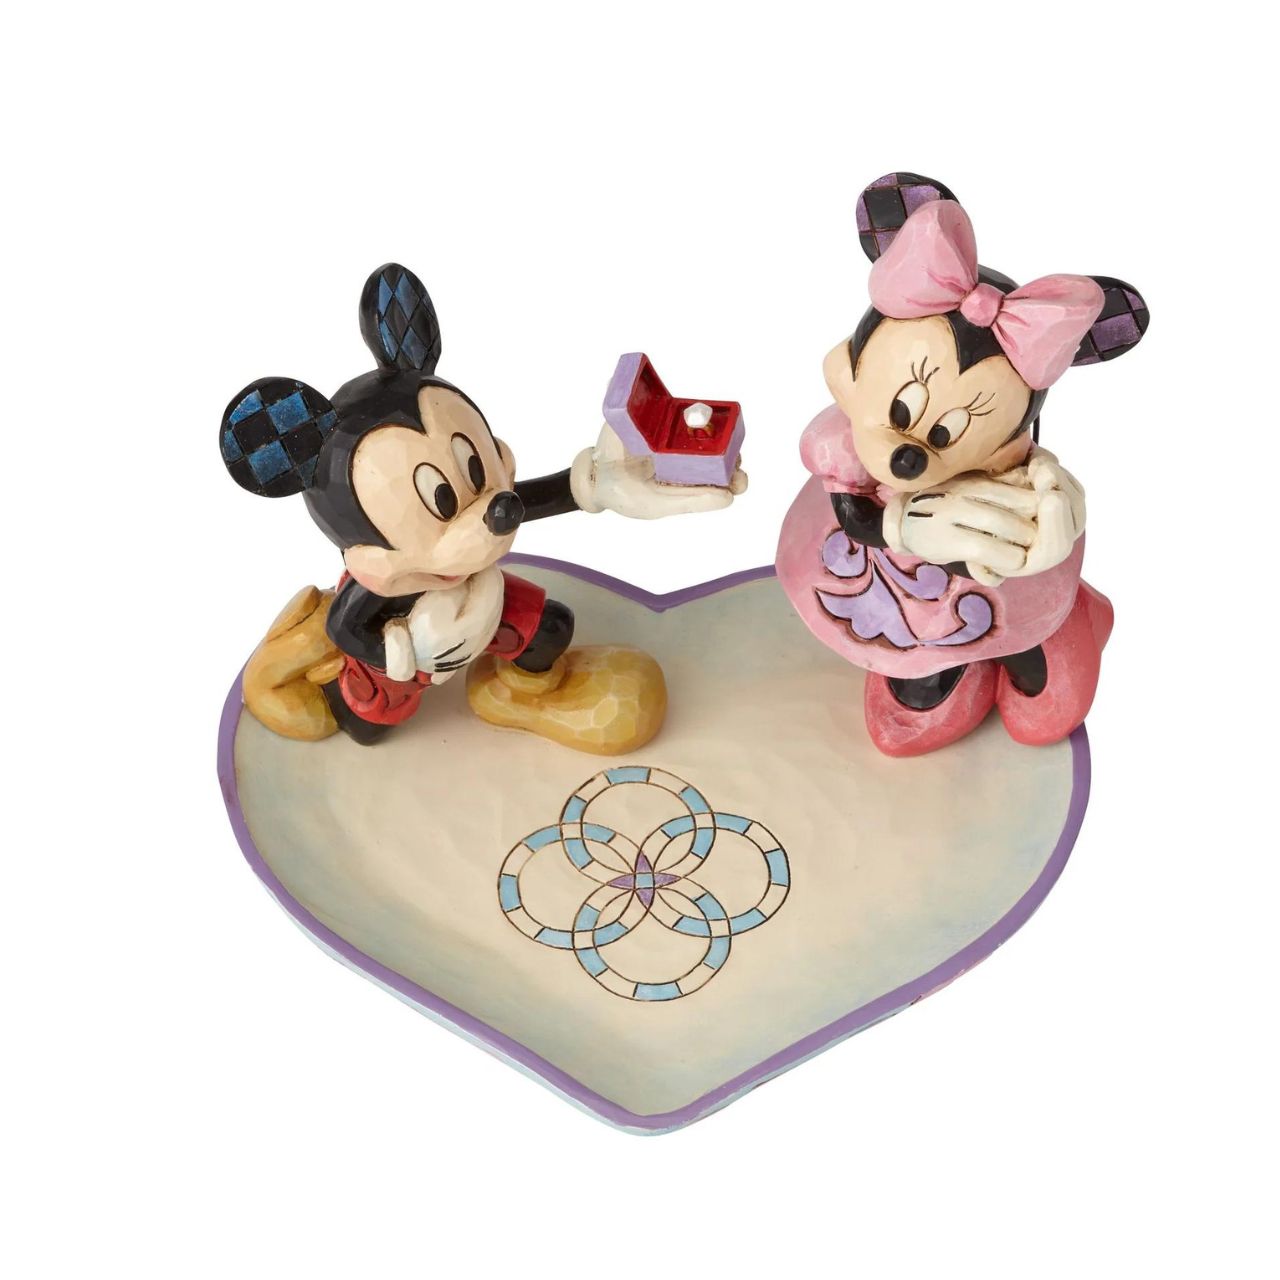 Disney A Magical Moment Mickey Proposing to Minnie Mouse Figurine  Mickey Mouse is the soul of romance as he proposes to a love-struck Minnie Mouse in this heartfelt design featuring the artistry of Jim Shore.